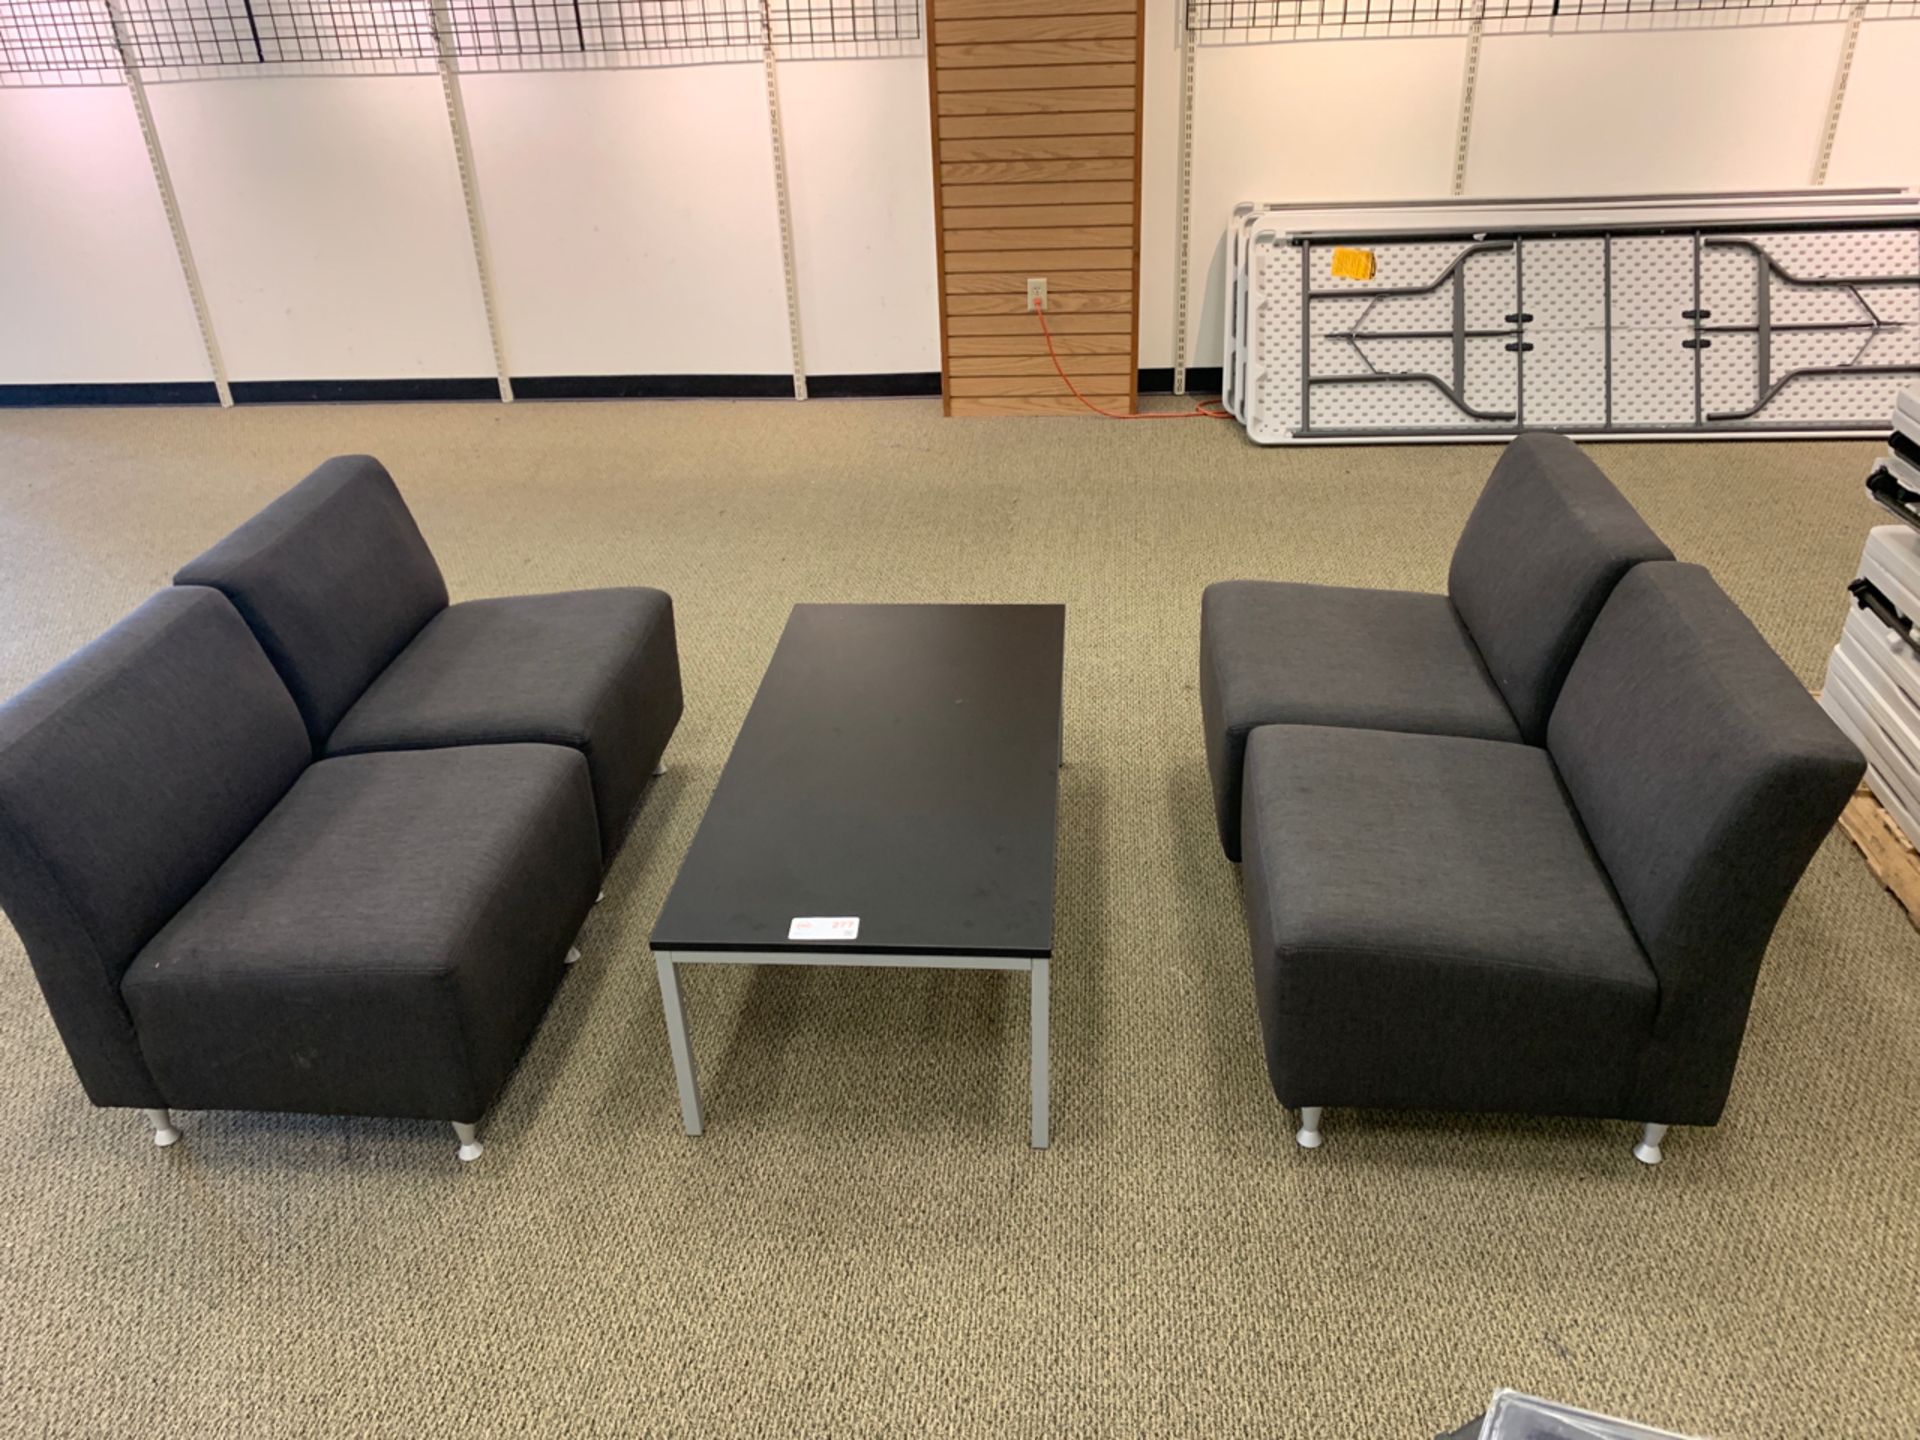 Lot of reception furniture